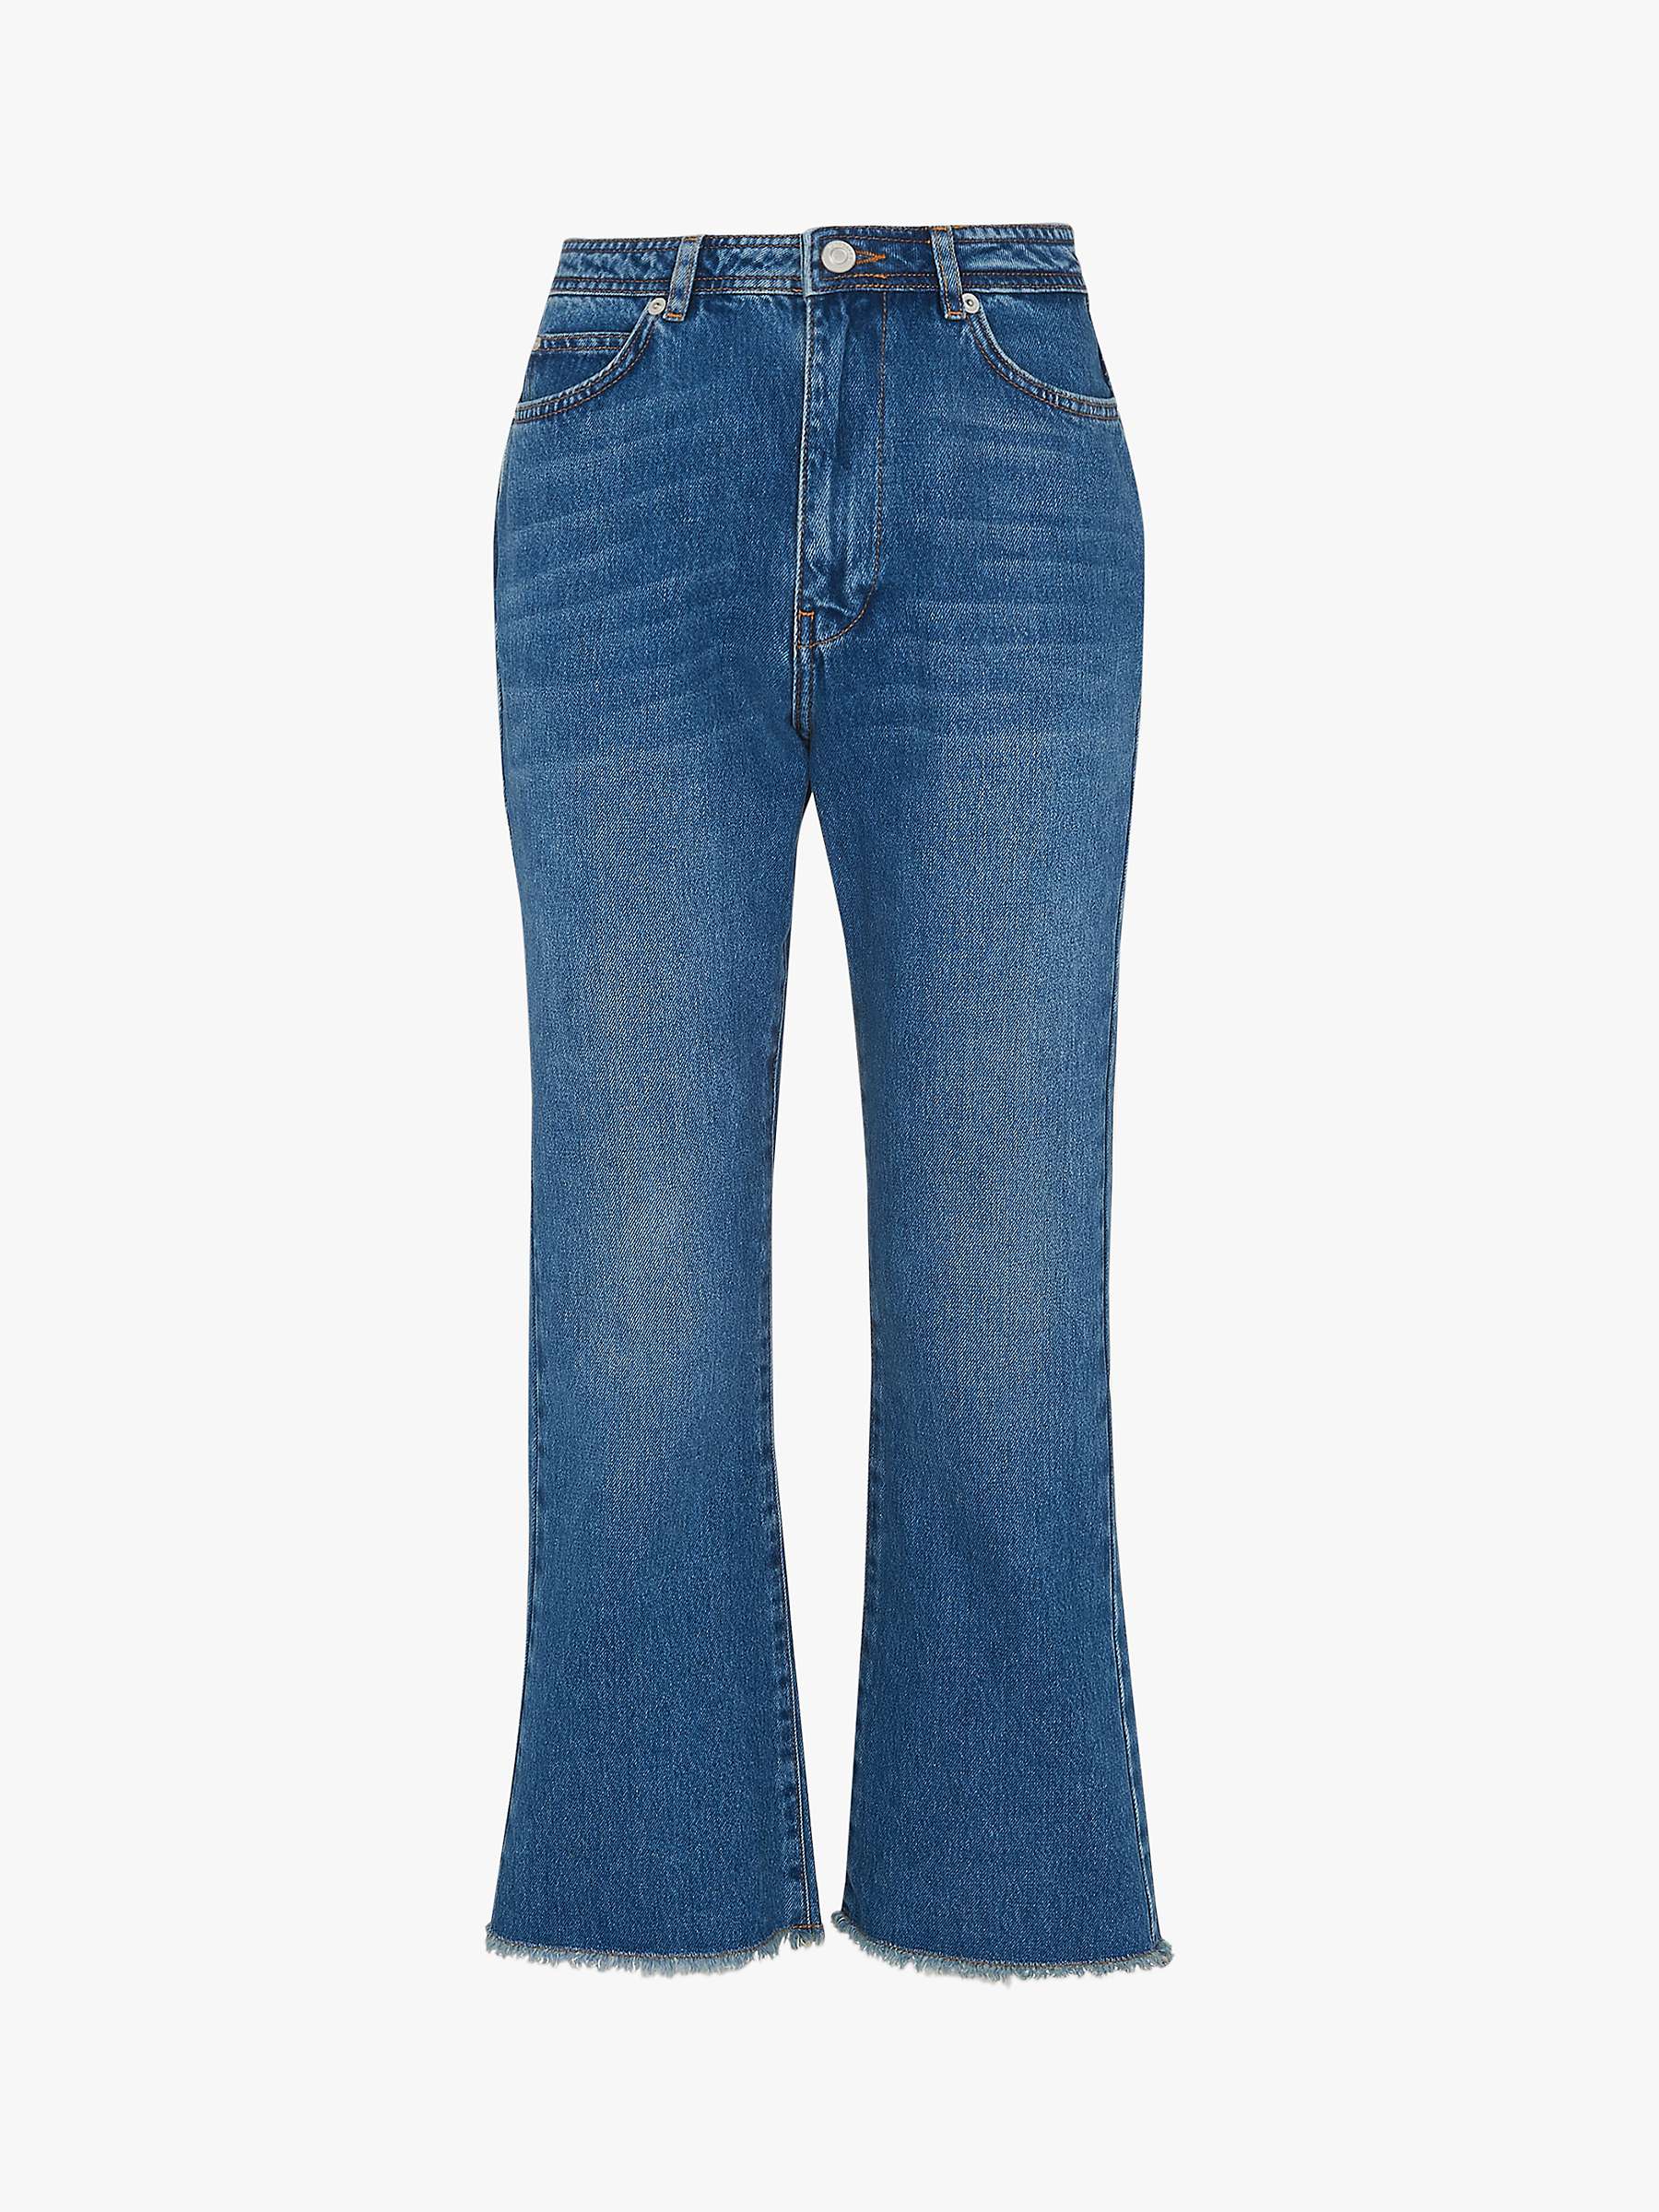 Buy Whistles Kick Flare Jeans Online at johnlewis.com